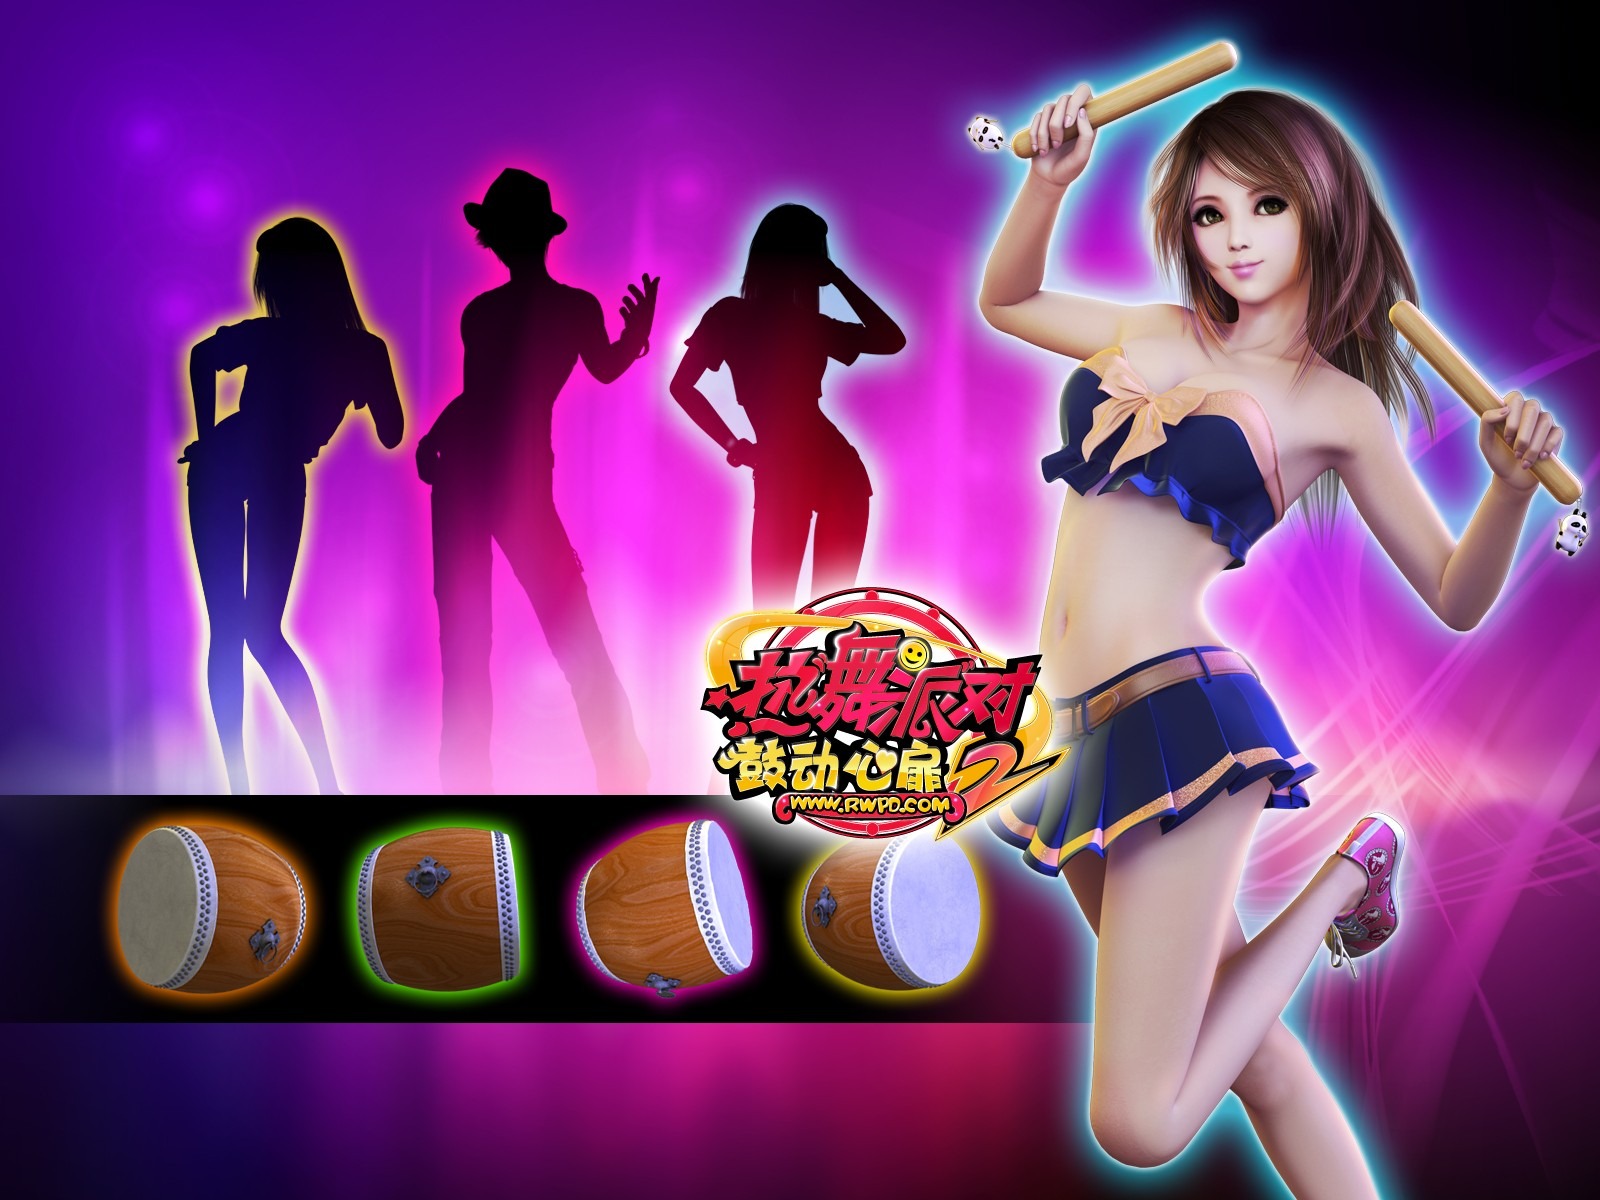 Online game Hot Dance Party II official wallpapers #15 - 1600x1200